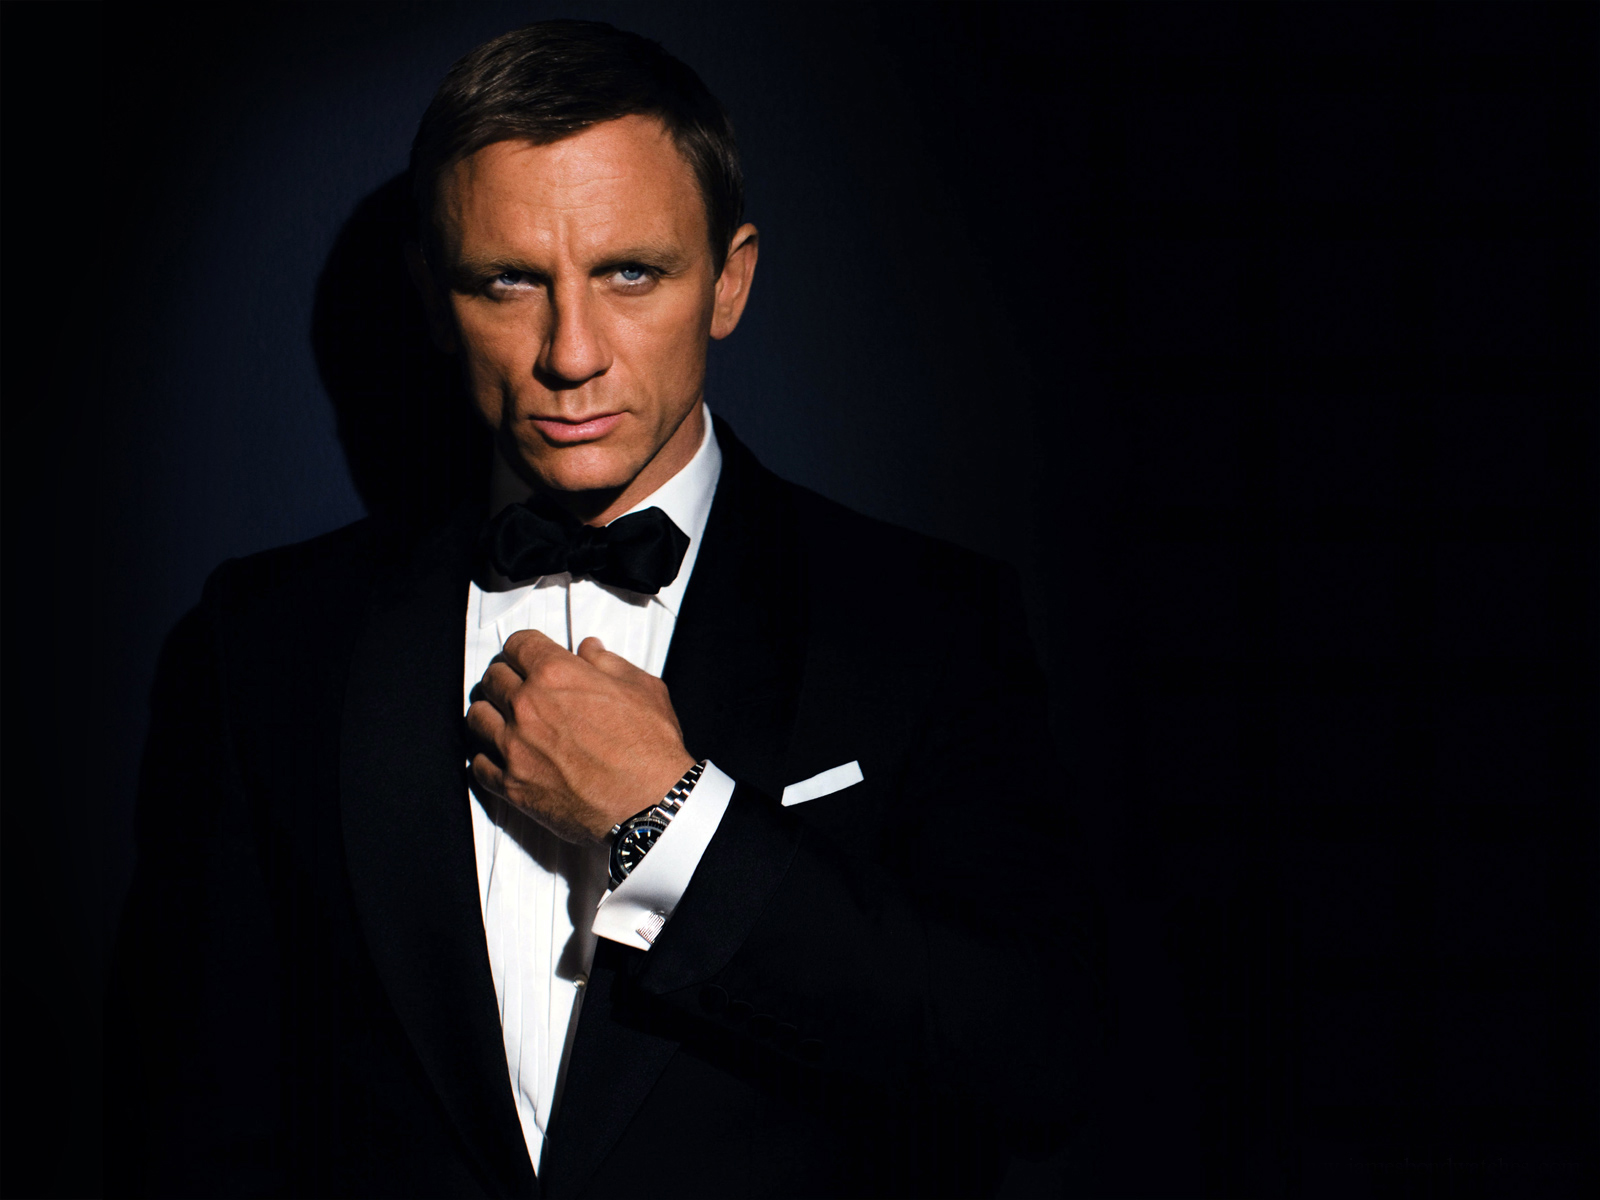 HD Wallpapers Fine: hollywood james bond best size high resolution hd ...